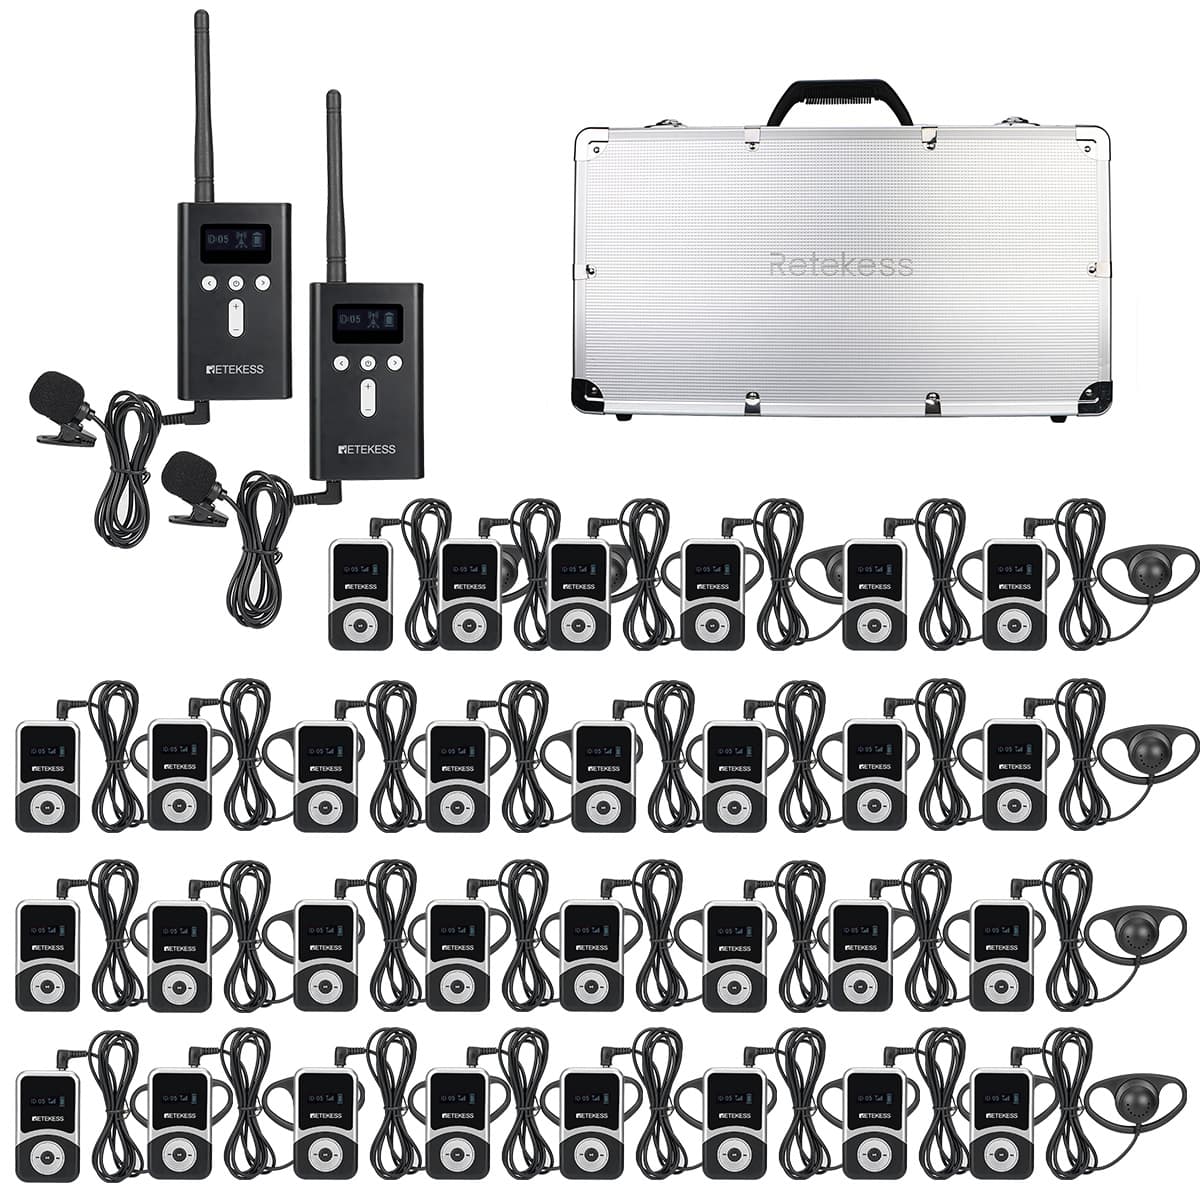 Retekess T130S T131S Tour Guide Solutions for Tourism with Charging Case